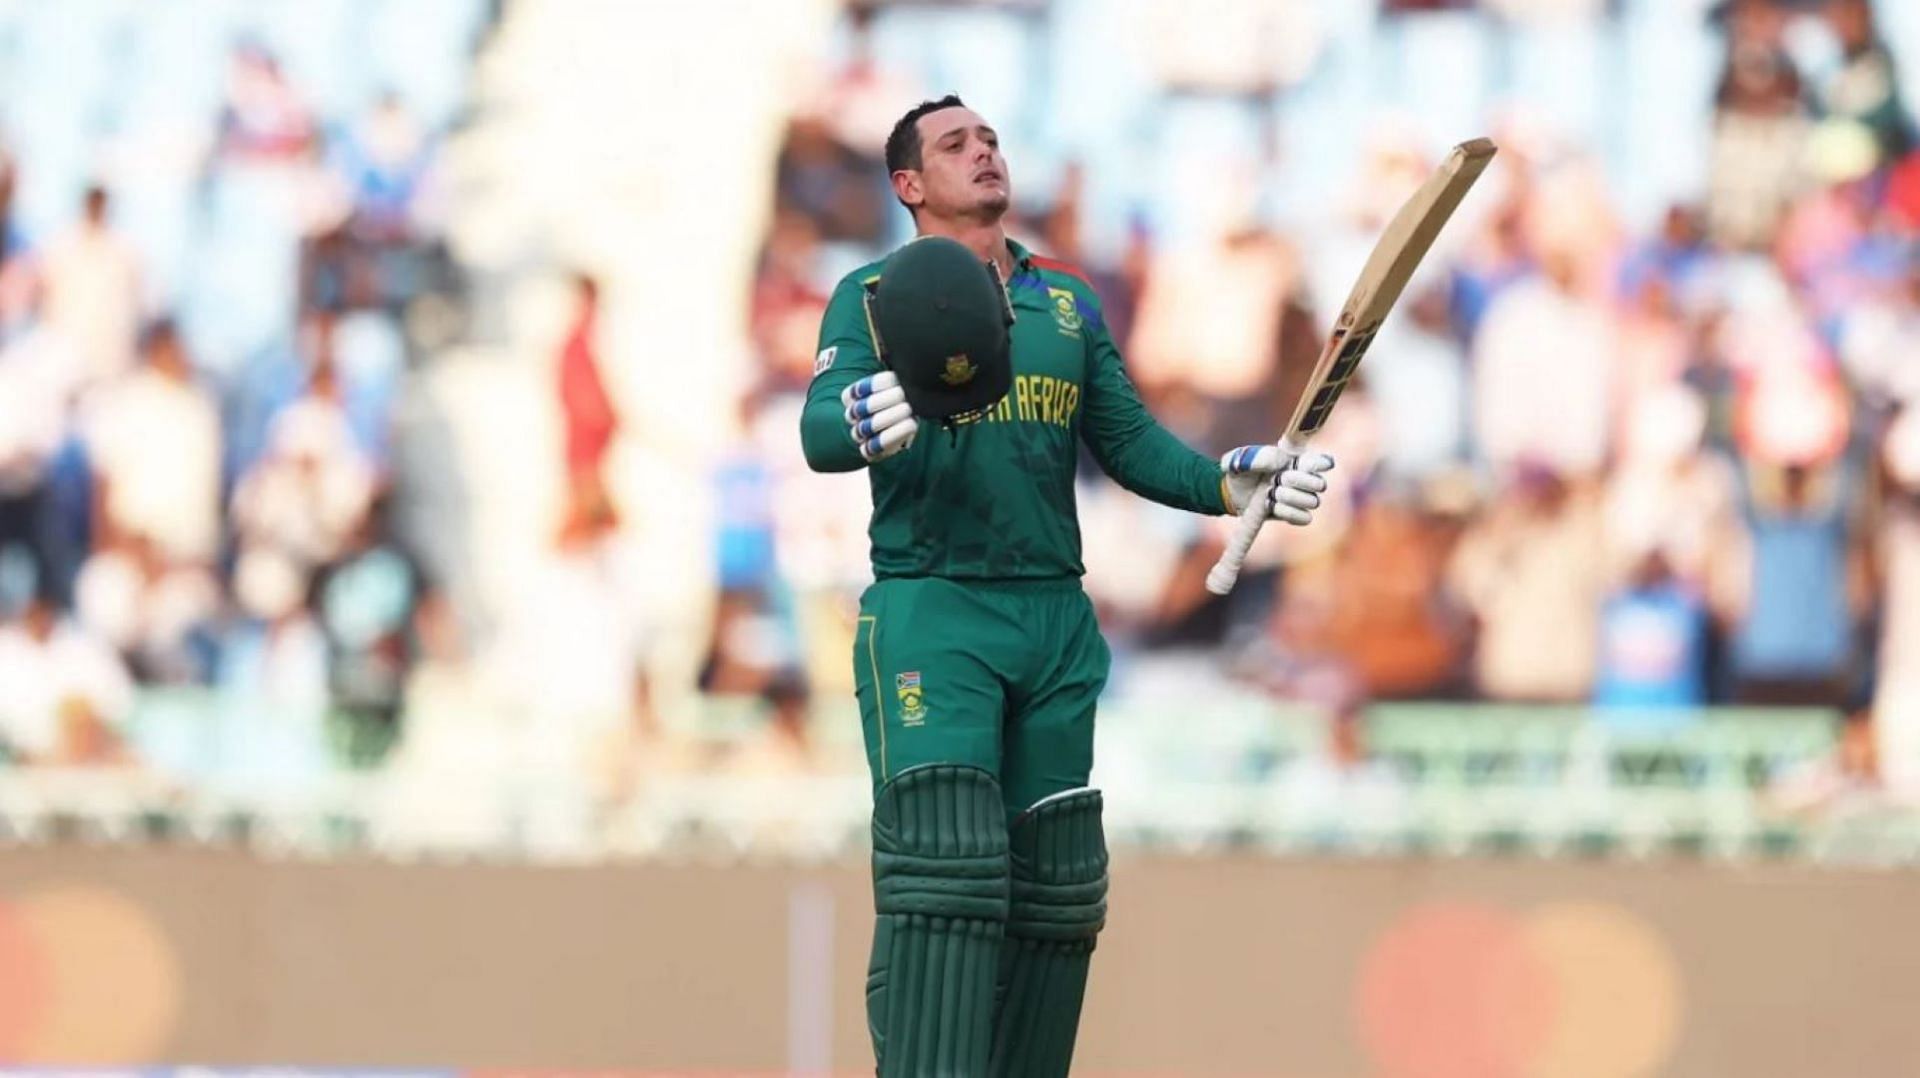 De Kock scored a second consecutive century to decimate the Aussie bowlers.